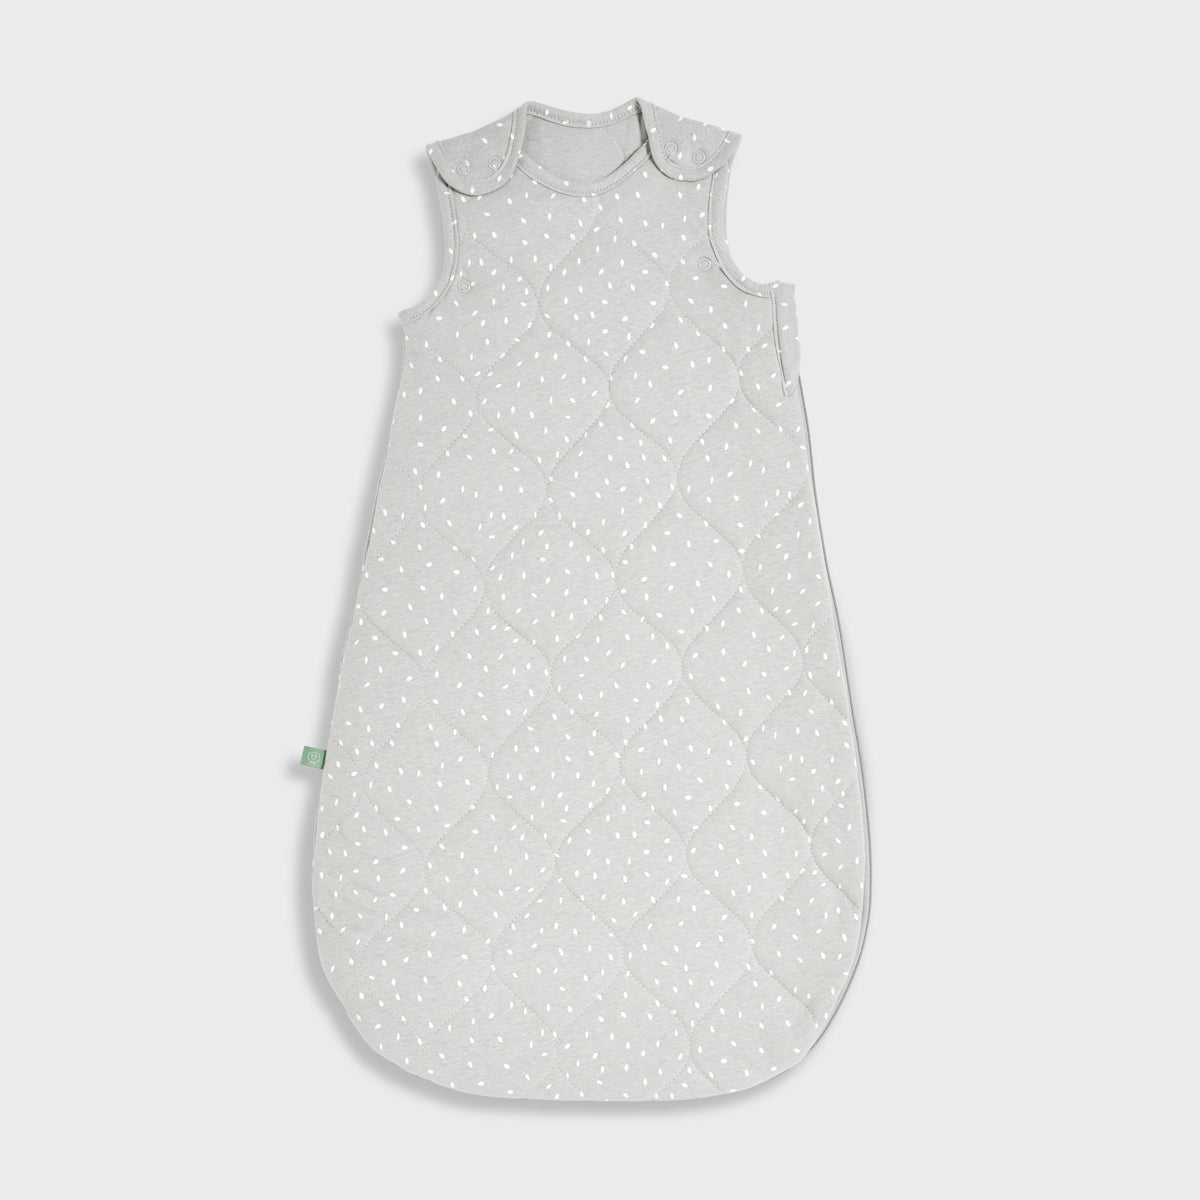 The Little Green Sheep Organic baby sleeping bag - 2.5 tog 2.5 Tog 0-6 months / Dove Rice - Hola BB